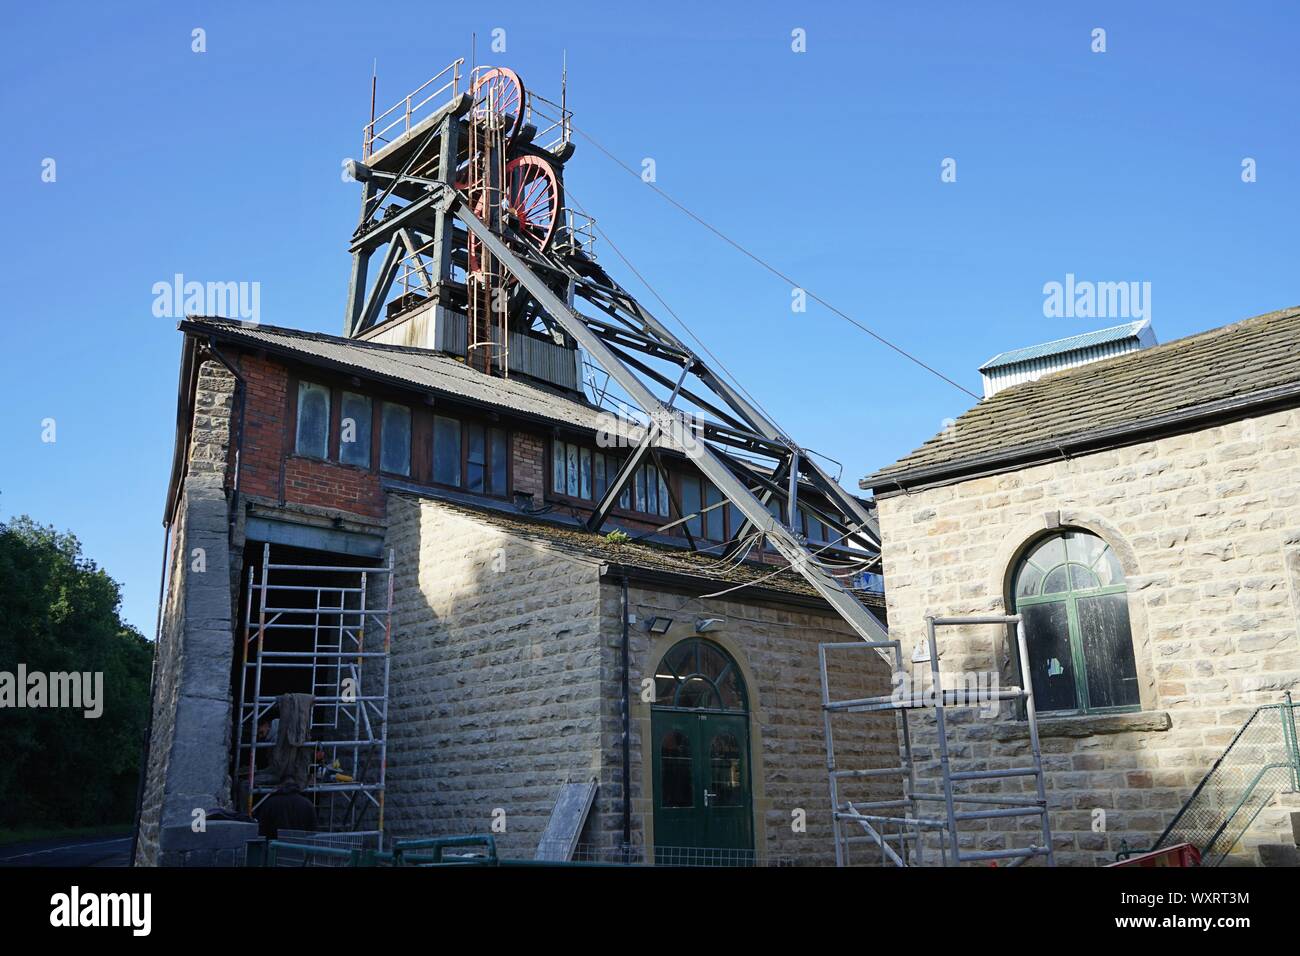 The winding head and winding house building at the national coal minning museum for england Walkfield Yorkshire England Stock Photo